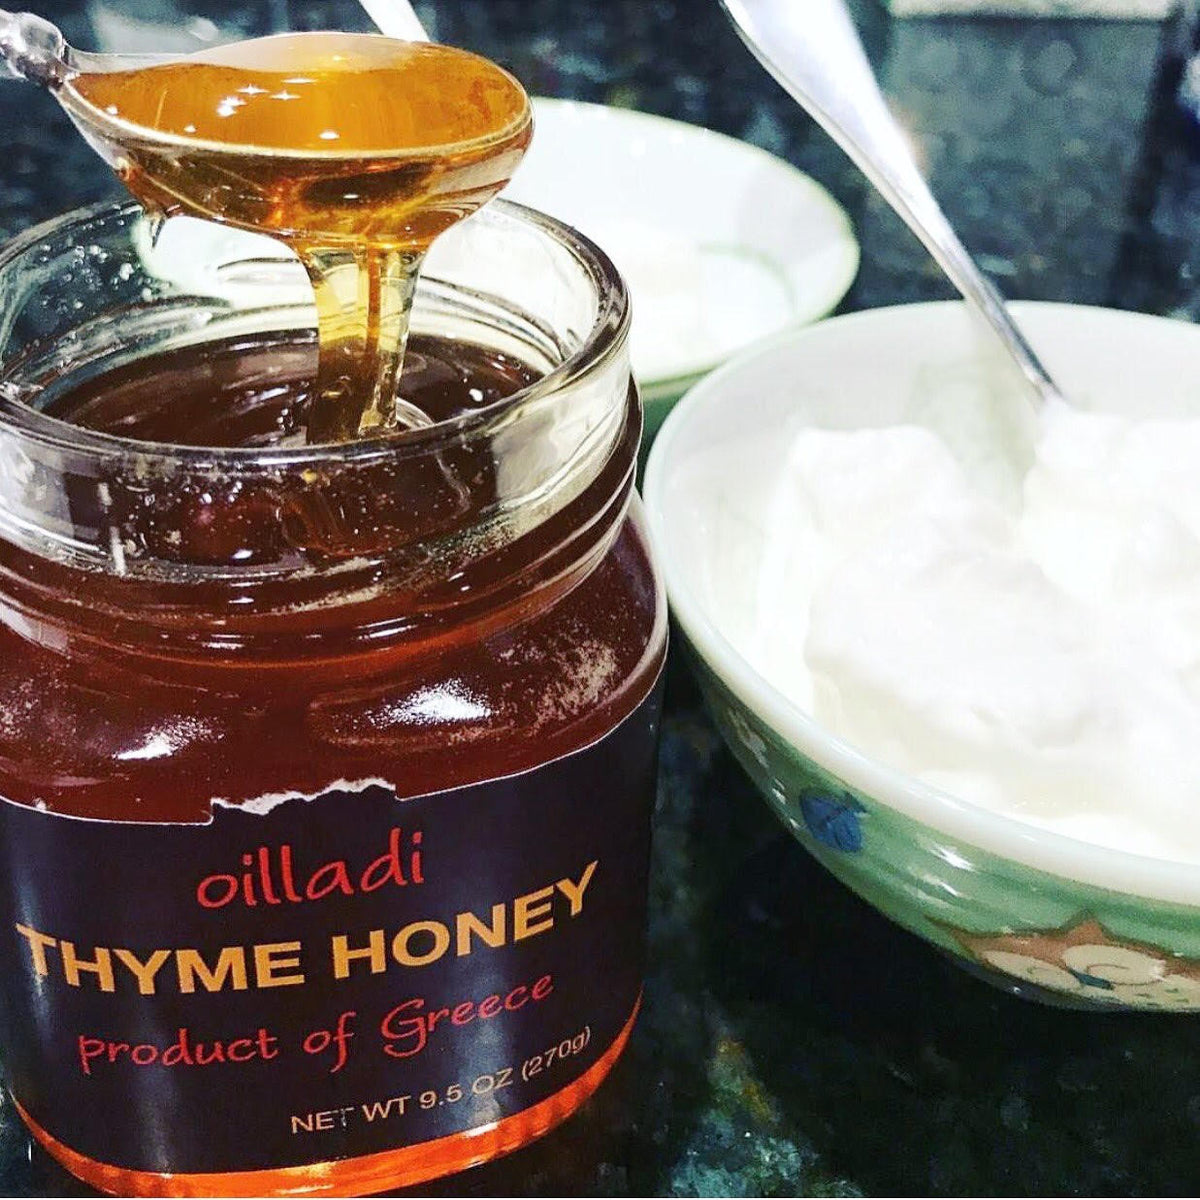 Oilladi thyme honey imported from the islands of Greece with yogurt